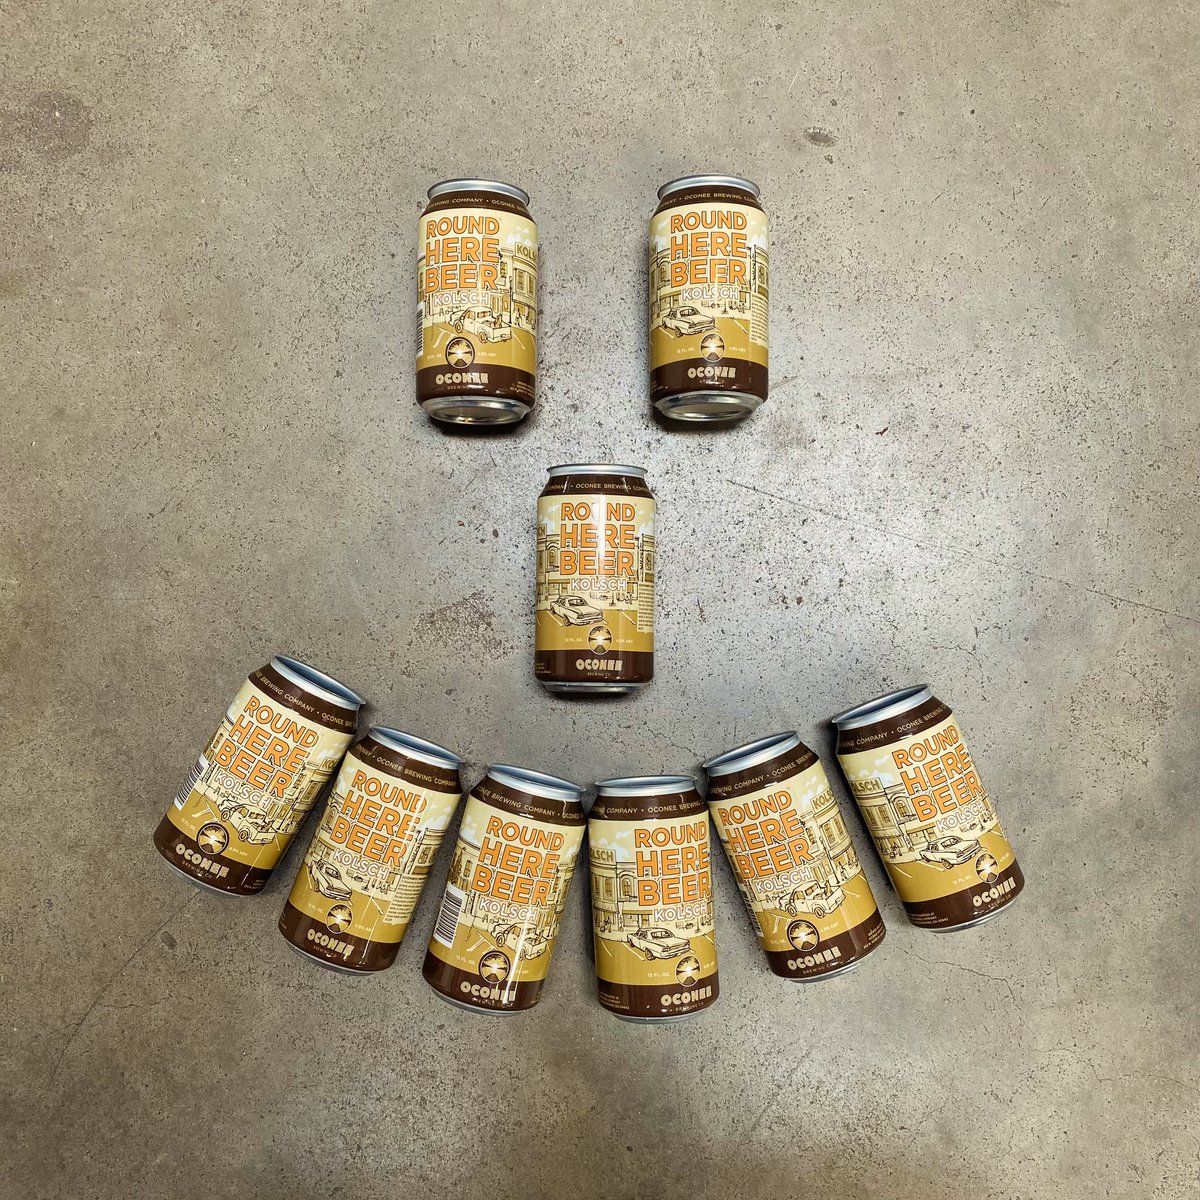 Try this visual trick!  If you see a smiley face, you love craft beer! 😯😃 Let us know if this worked for you!

#trick #tryit #visual #smiley #smileyface #craftbeer #wow #haha #lol